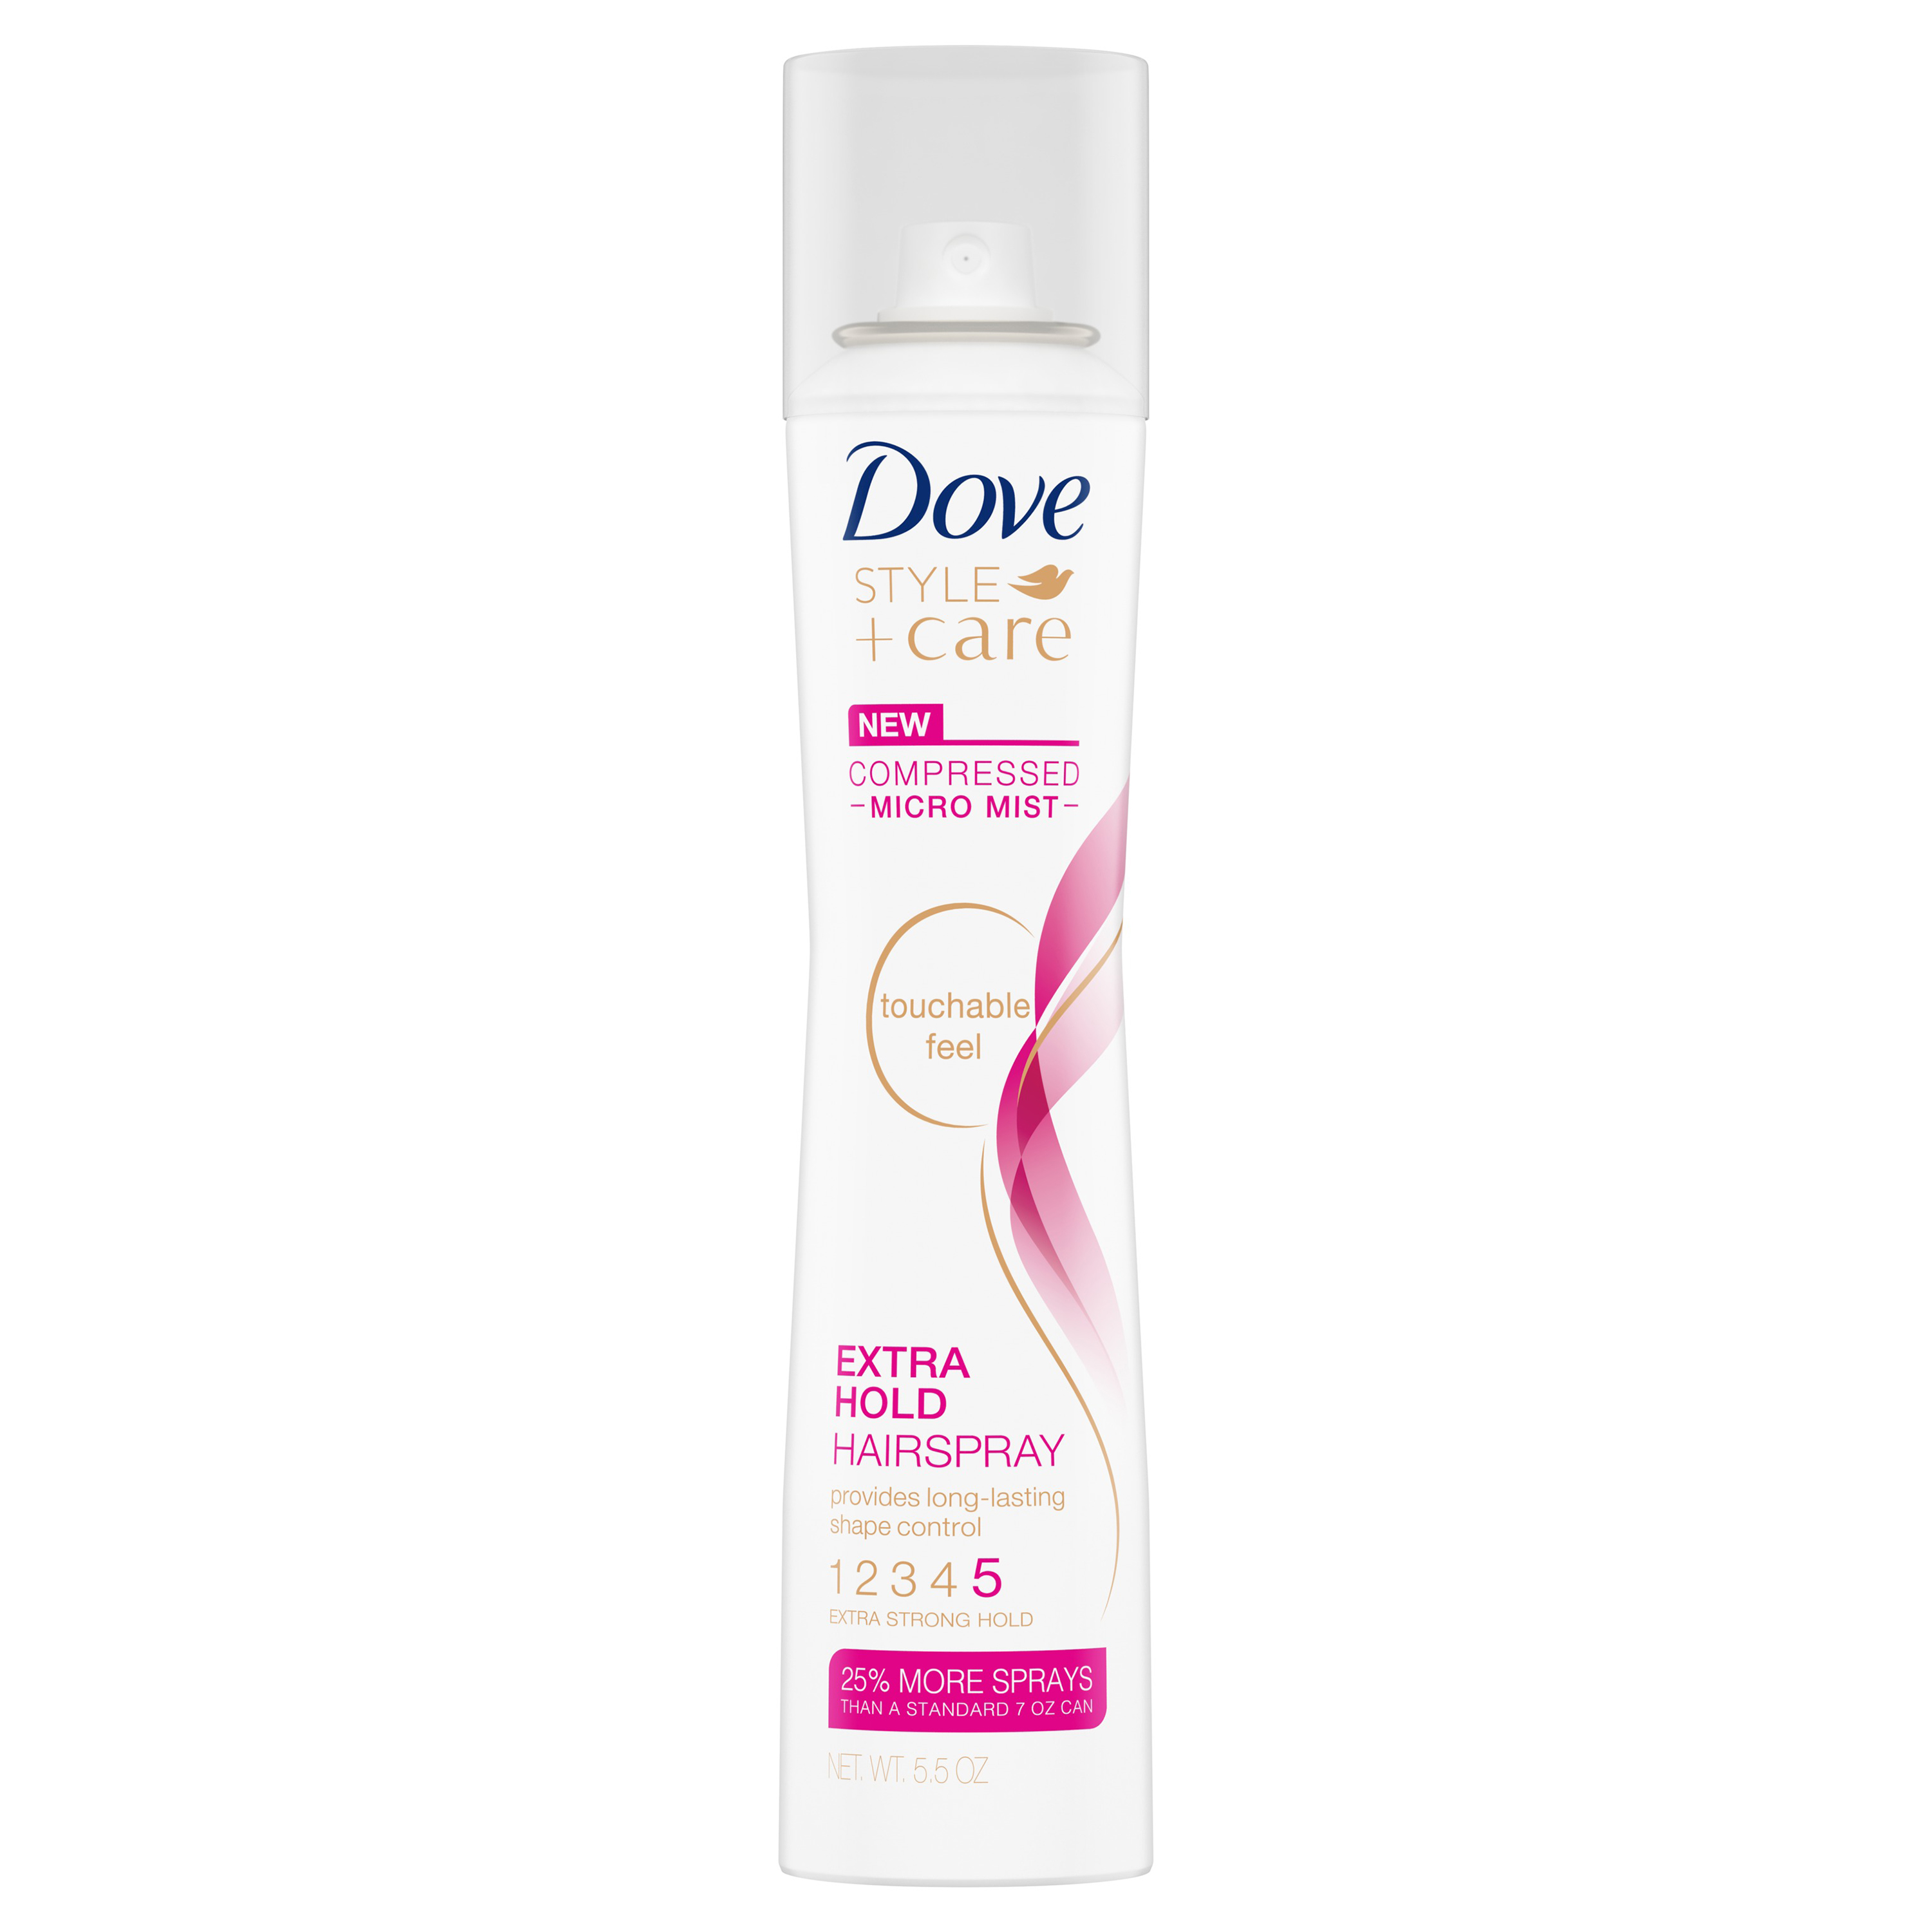 Dove Style + Care Extra Hold Hairspray, 5.5 oz - image 1 of 5